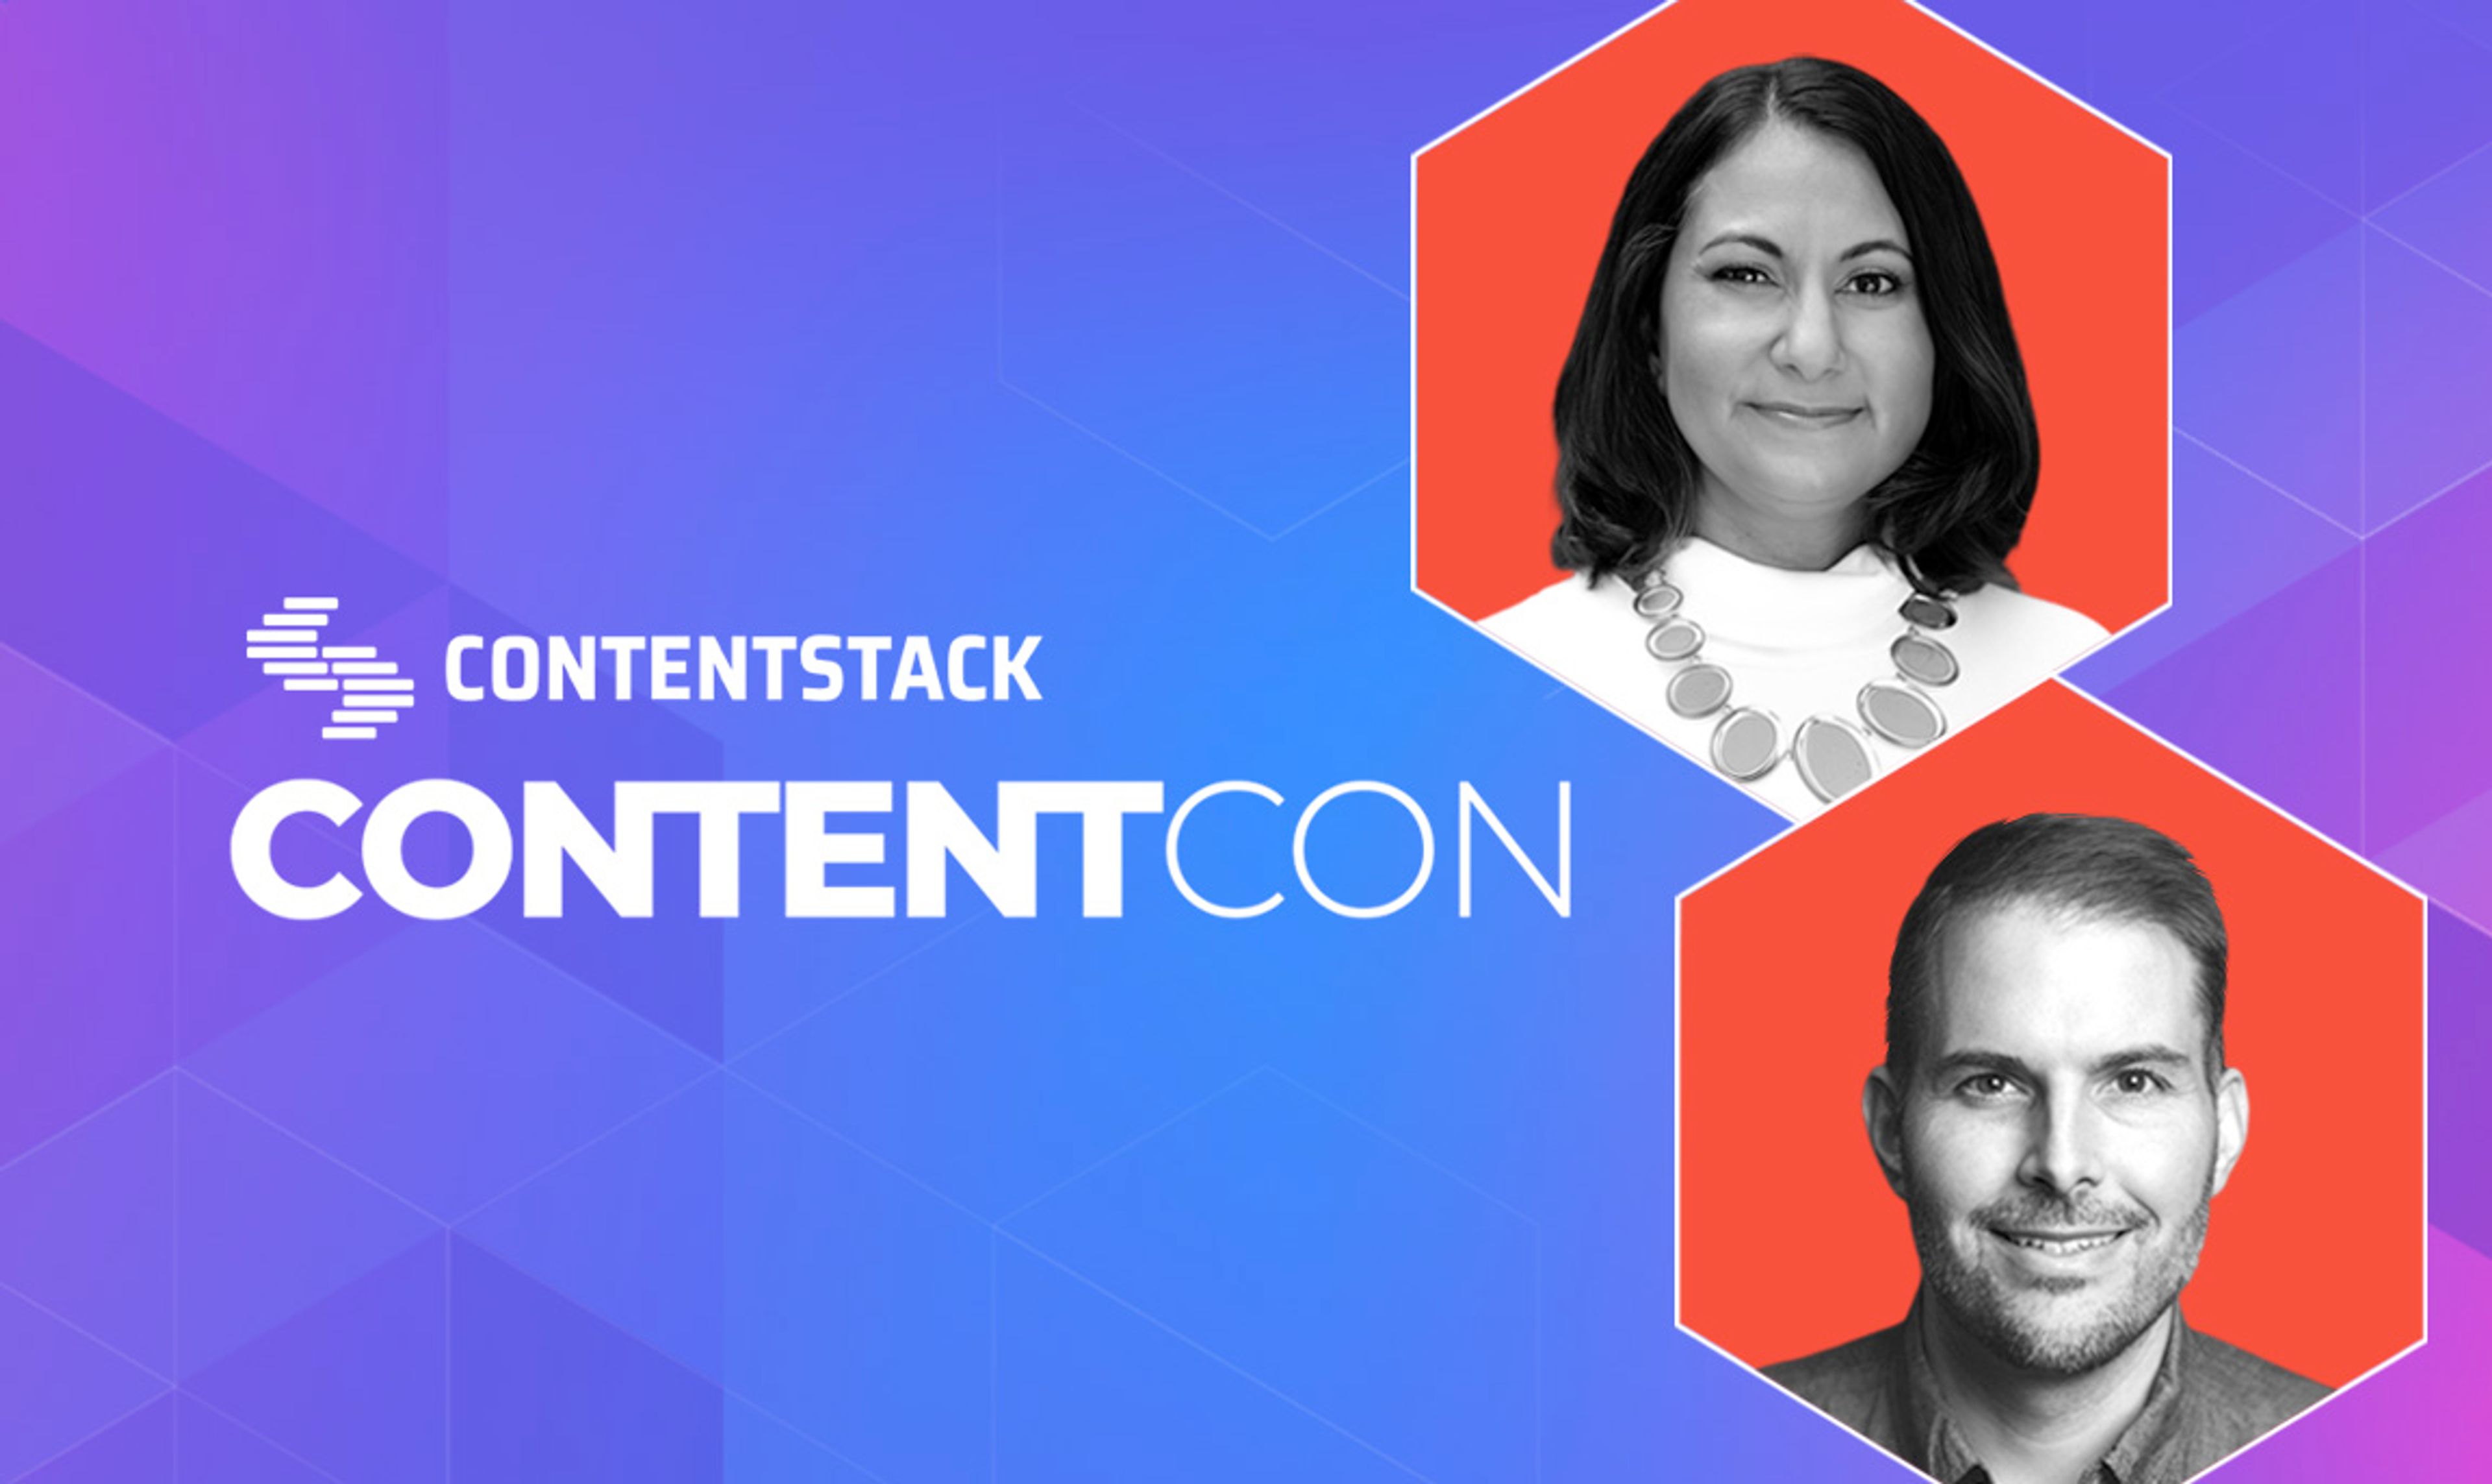 Contentstack logo and ContentCon event title text with headshots of CEO Neha Sampat and VP of Product Conor Egan